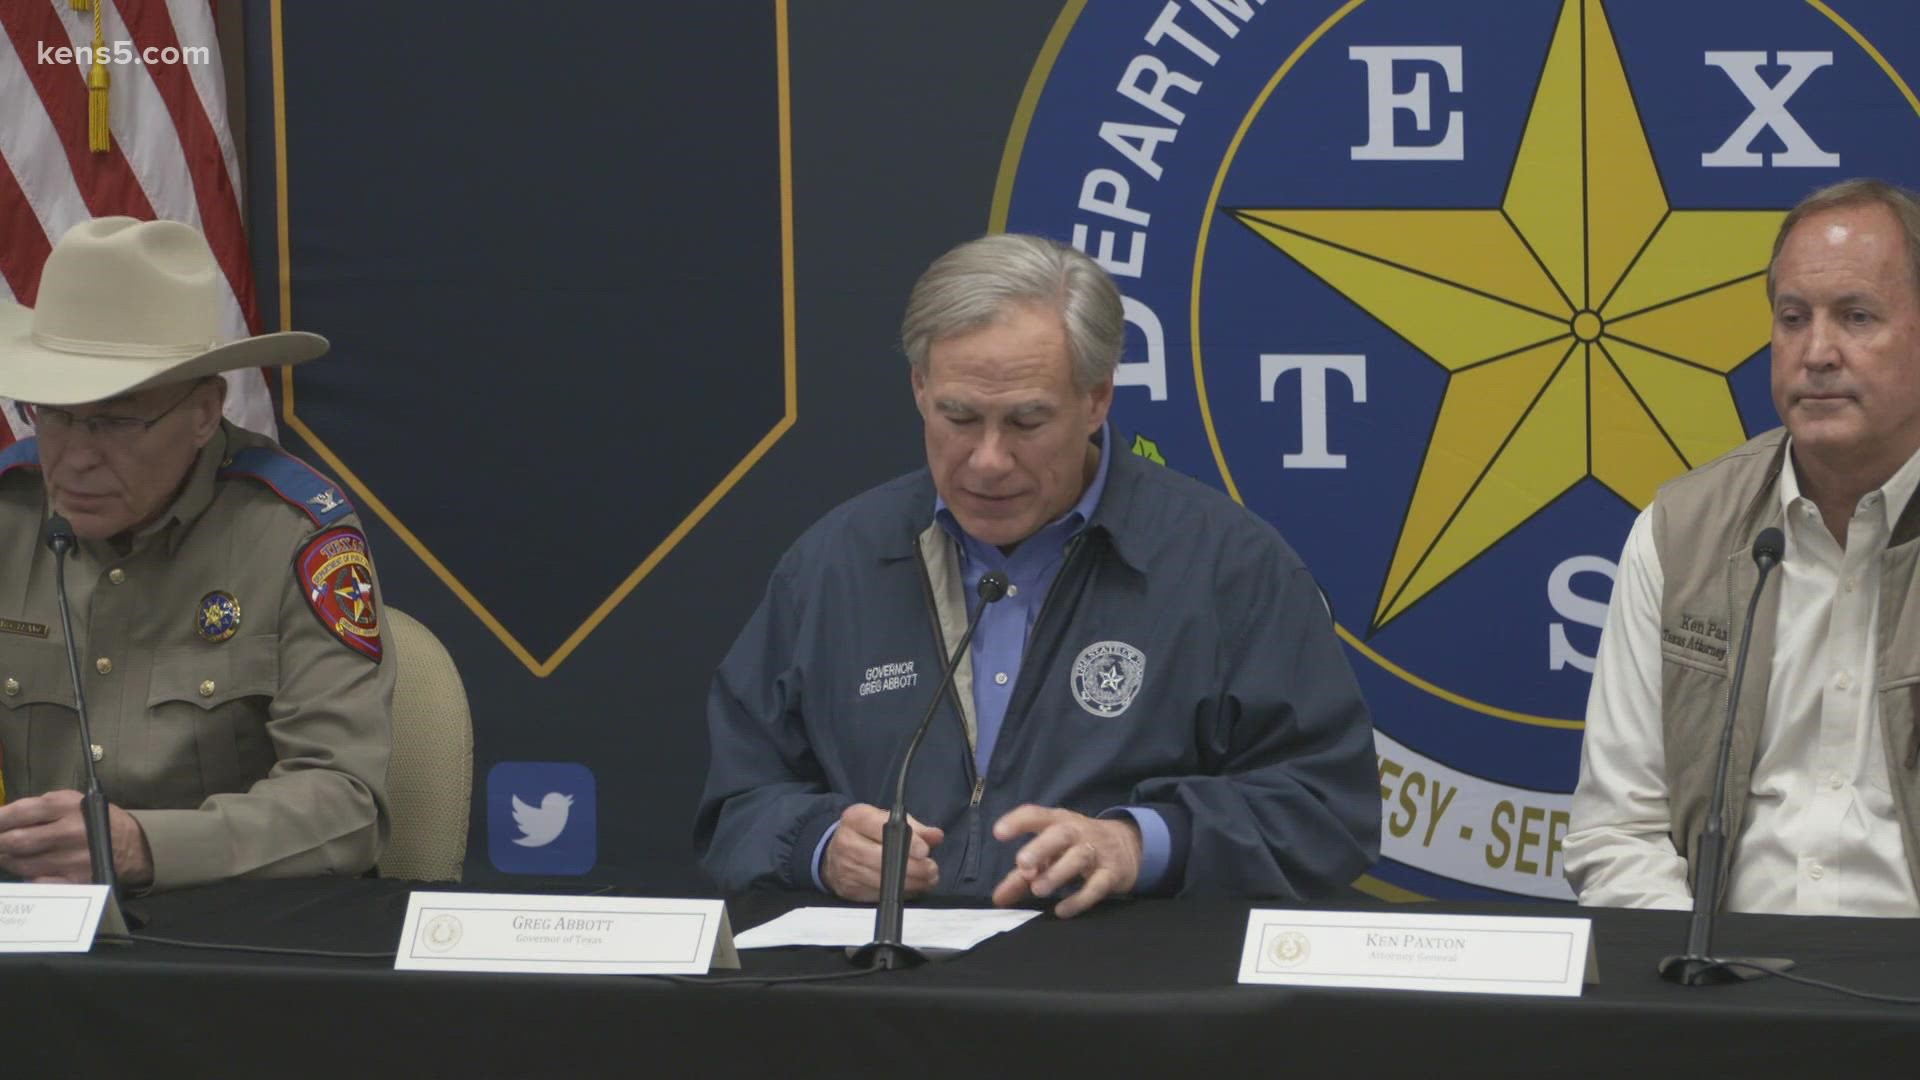 It's part of the one-year anniversary of Operation Lone Star, which was launched to "combat the smuggling of people and drugs into Texas."